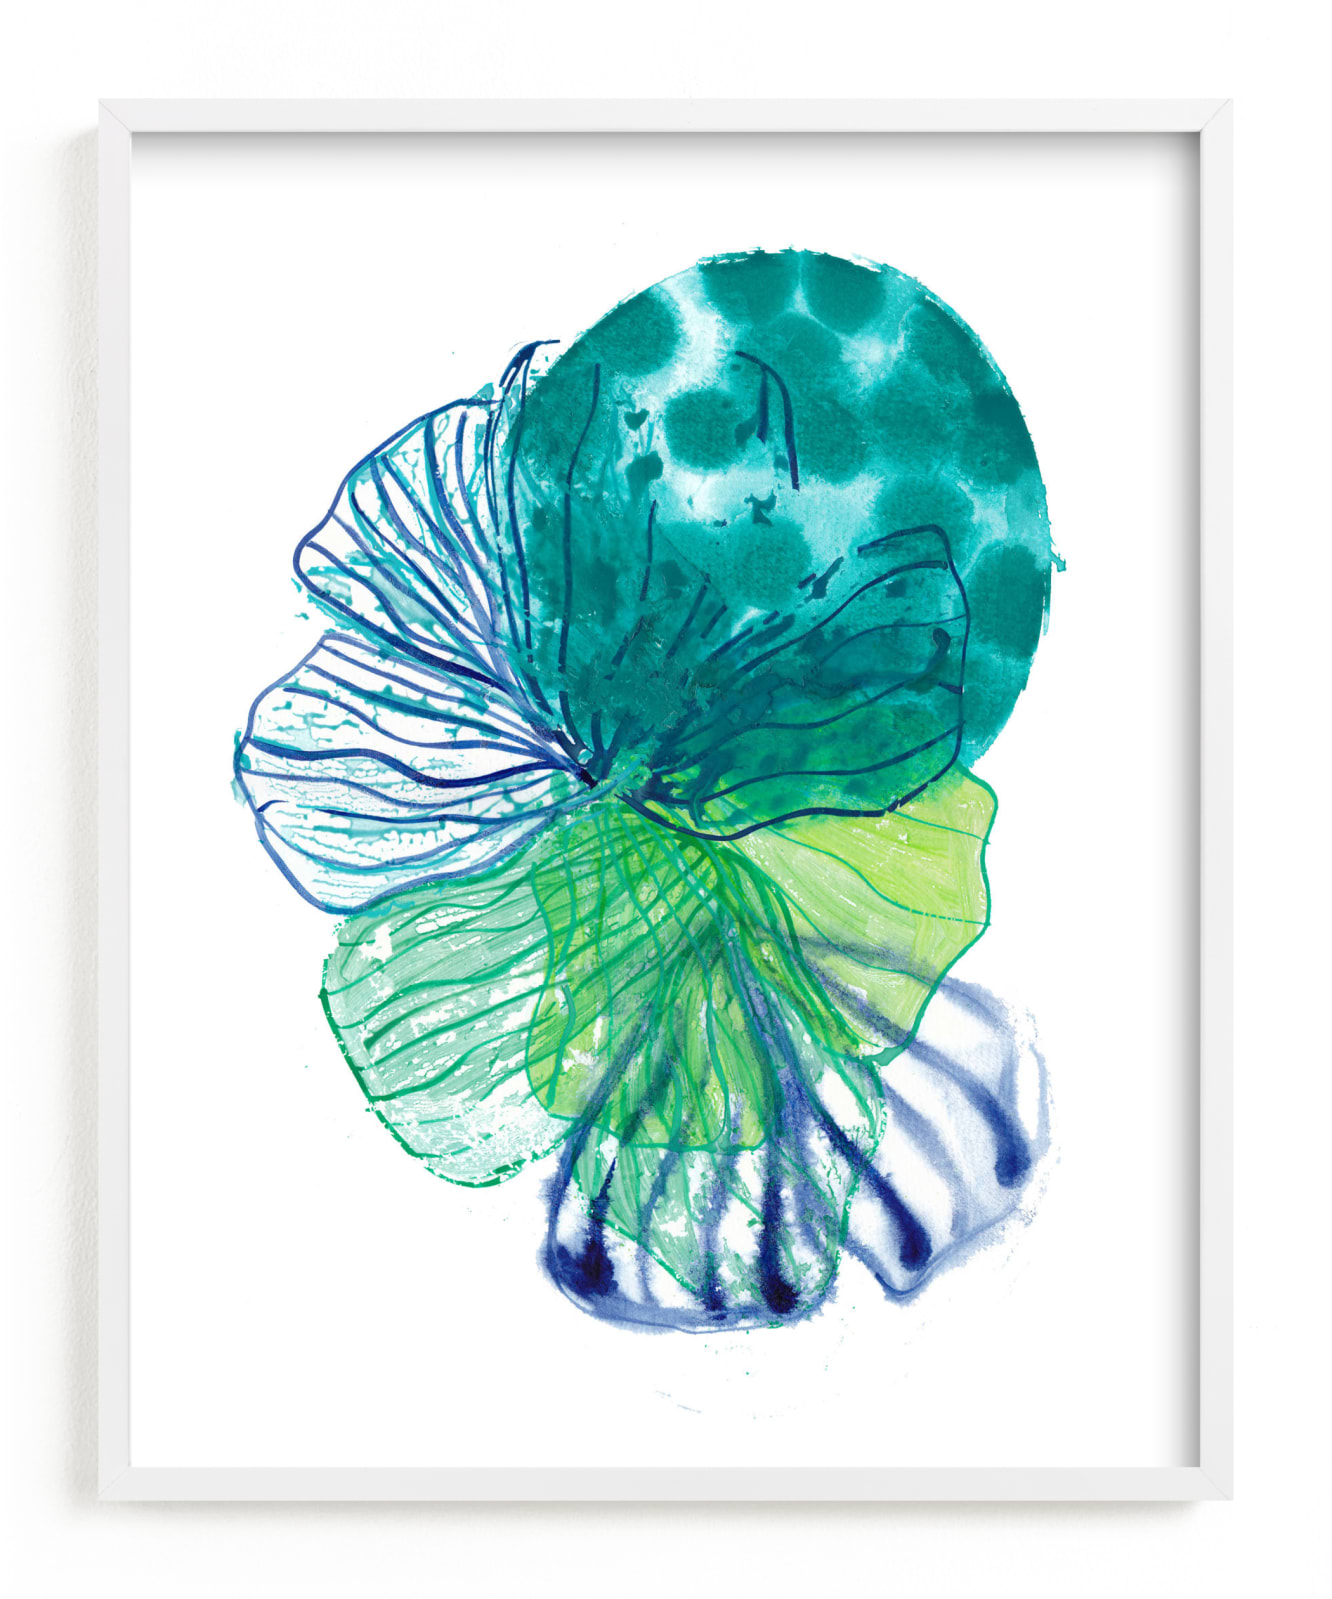 "Skeleton Petals 5" - Art Print by Maggie Ramirez Burns in beautiful frame options and a variety of sizes.